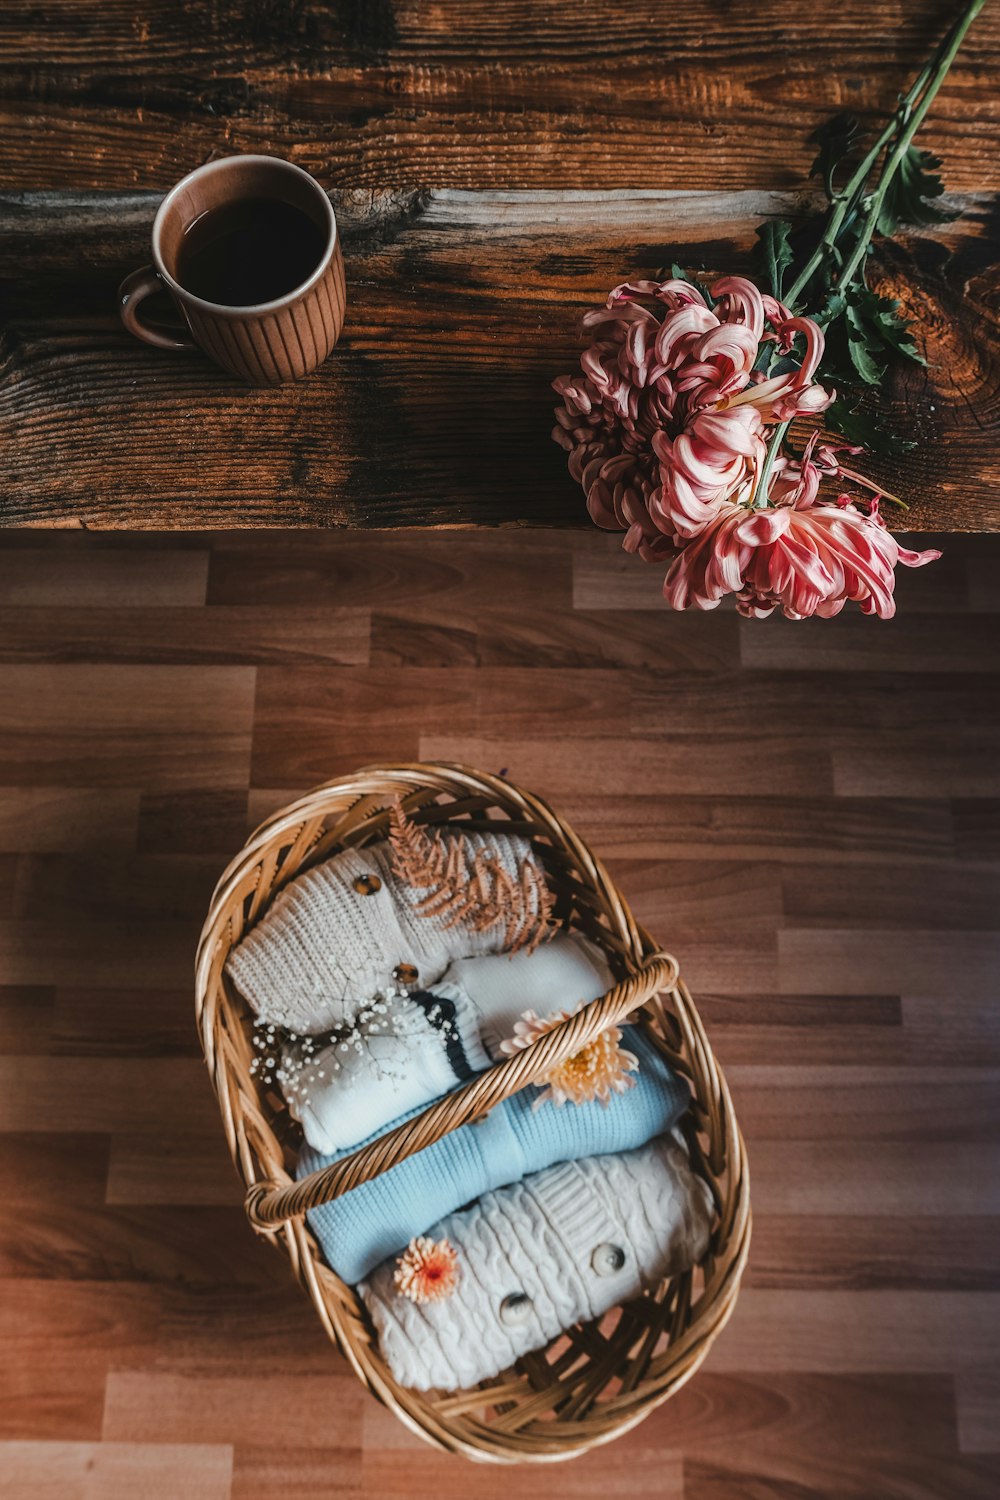 a basket filled with blankets next to a cup of coffee